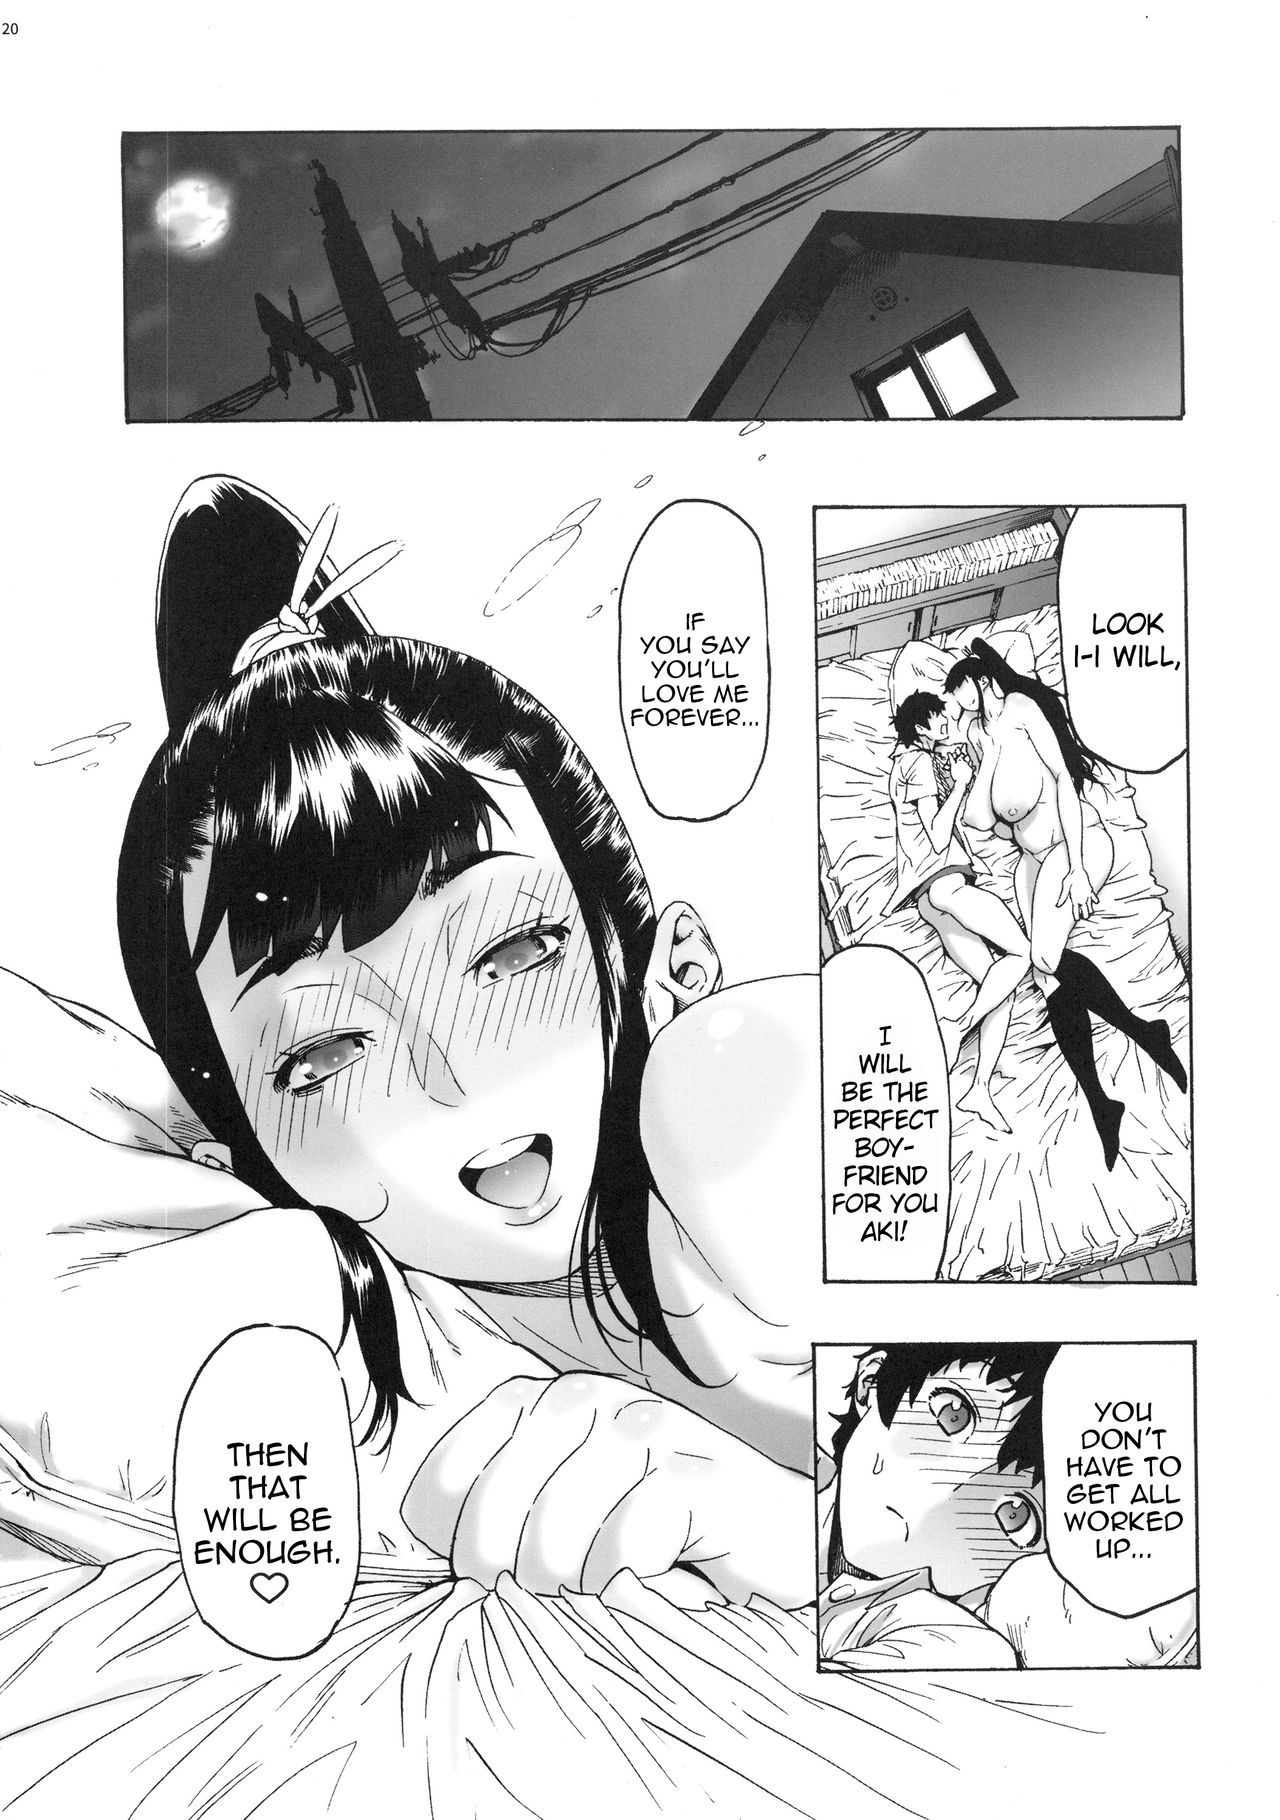 [Coochy-Coo (Bonten)] My Childhood friend is a JK Ponytailed Girl | With Aki-Nee 2 | AkiAss 3 | Trilogy [English] {Stopittarpit} page 43 full